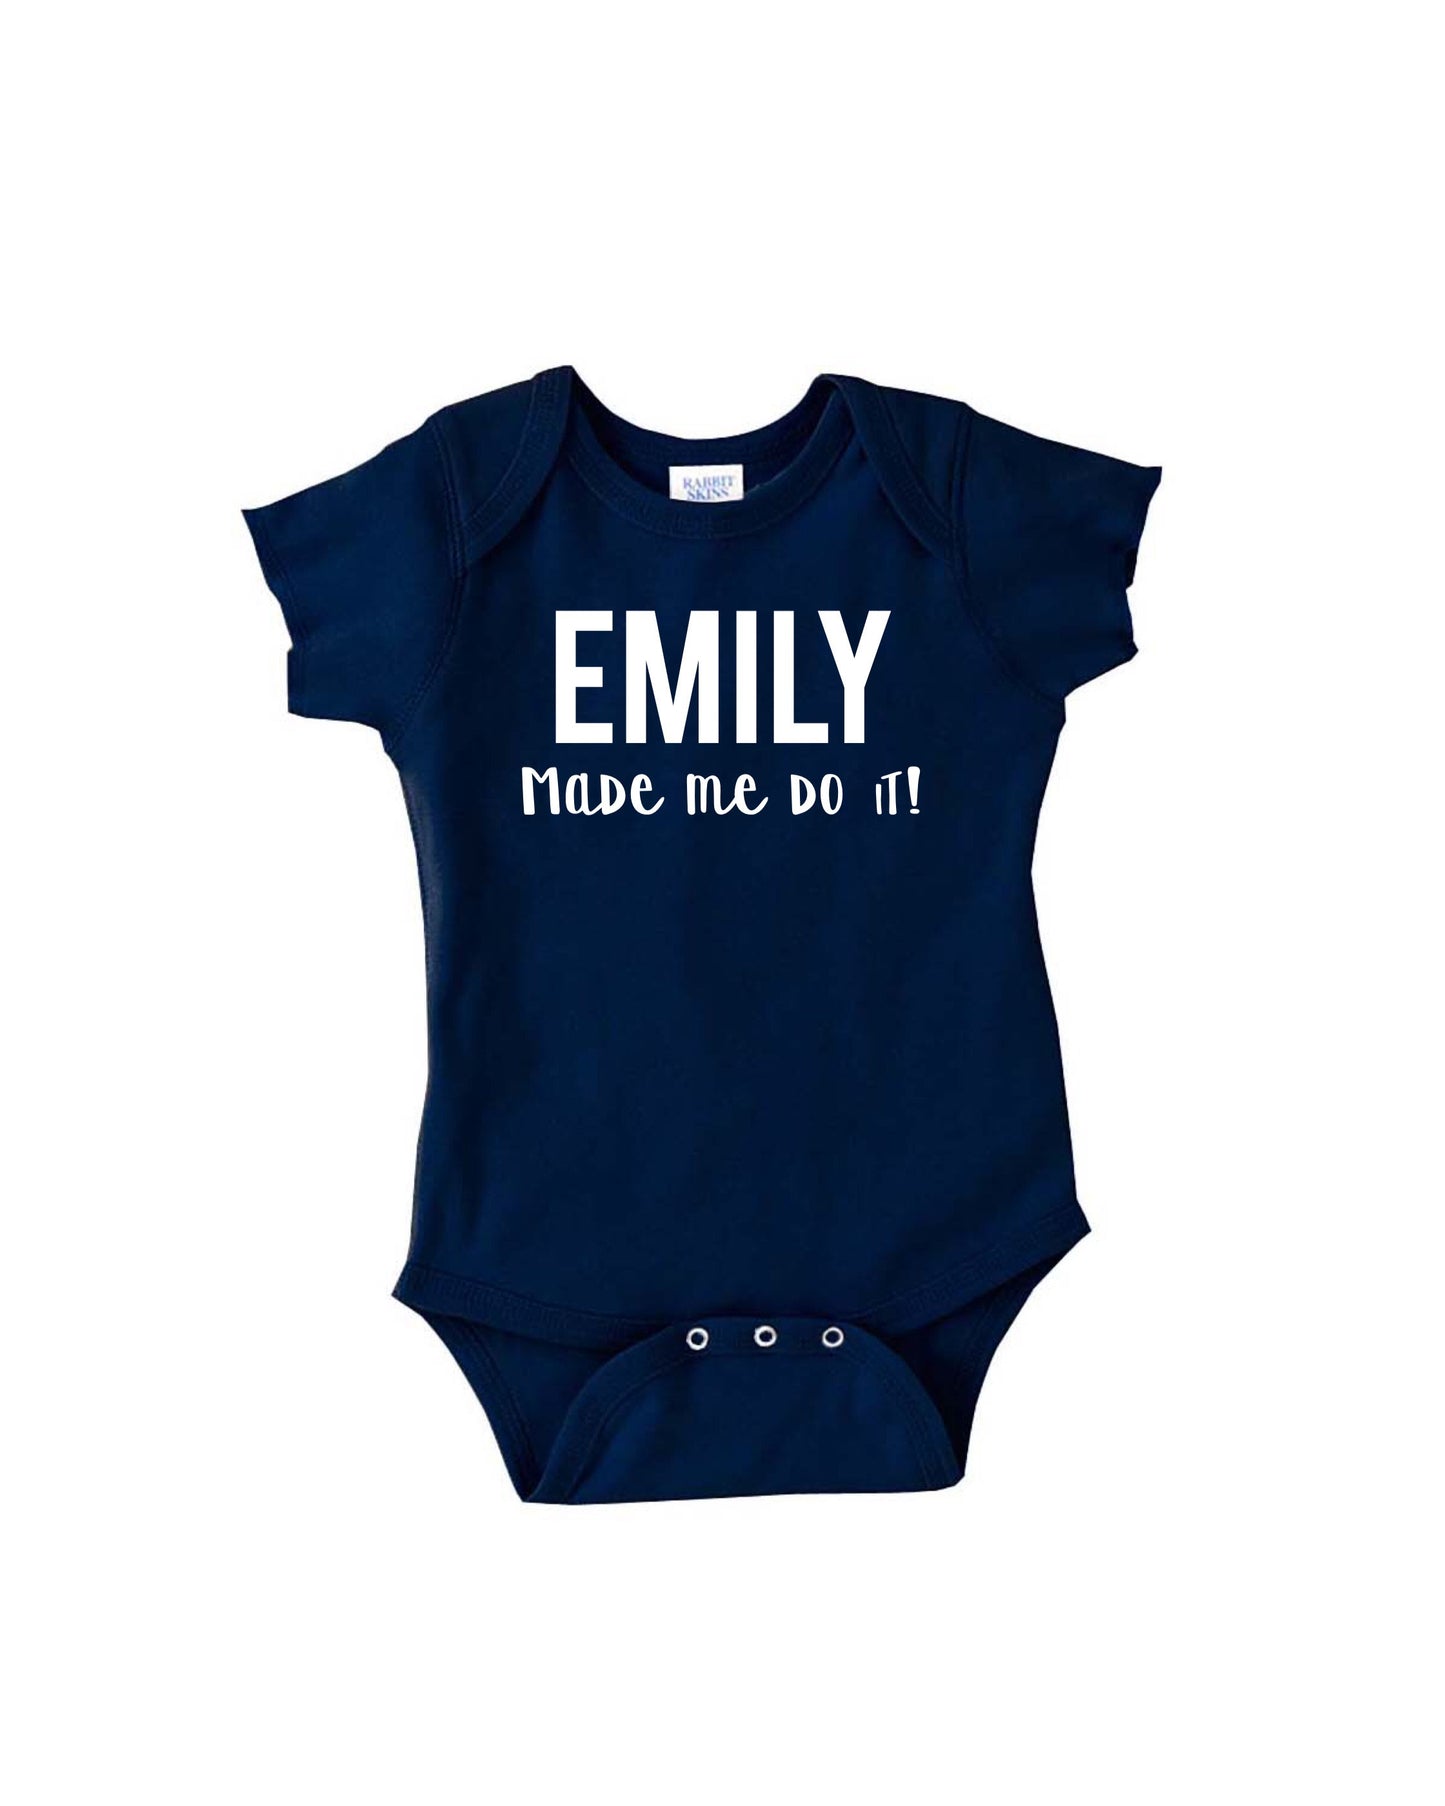 Twin shirt set| Twin name shirts  Baby name onesie| Baby shower gift| Gift for twins| gift for new mom| personalized baby onesie| twin set